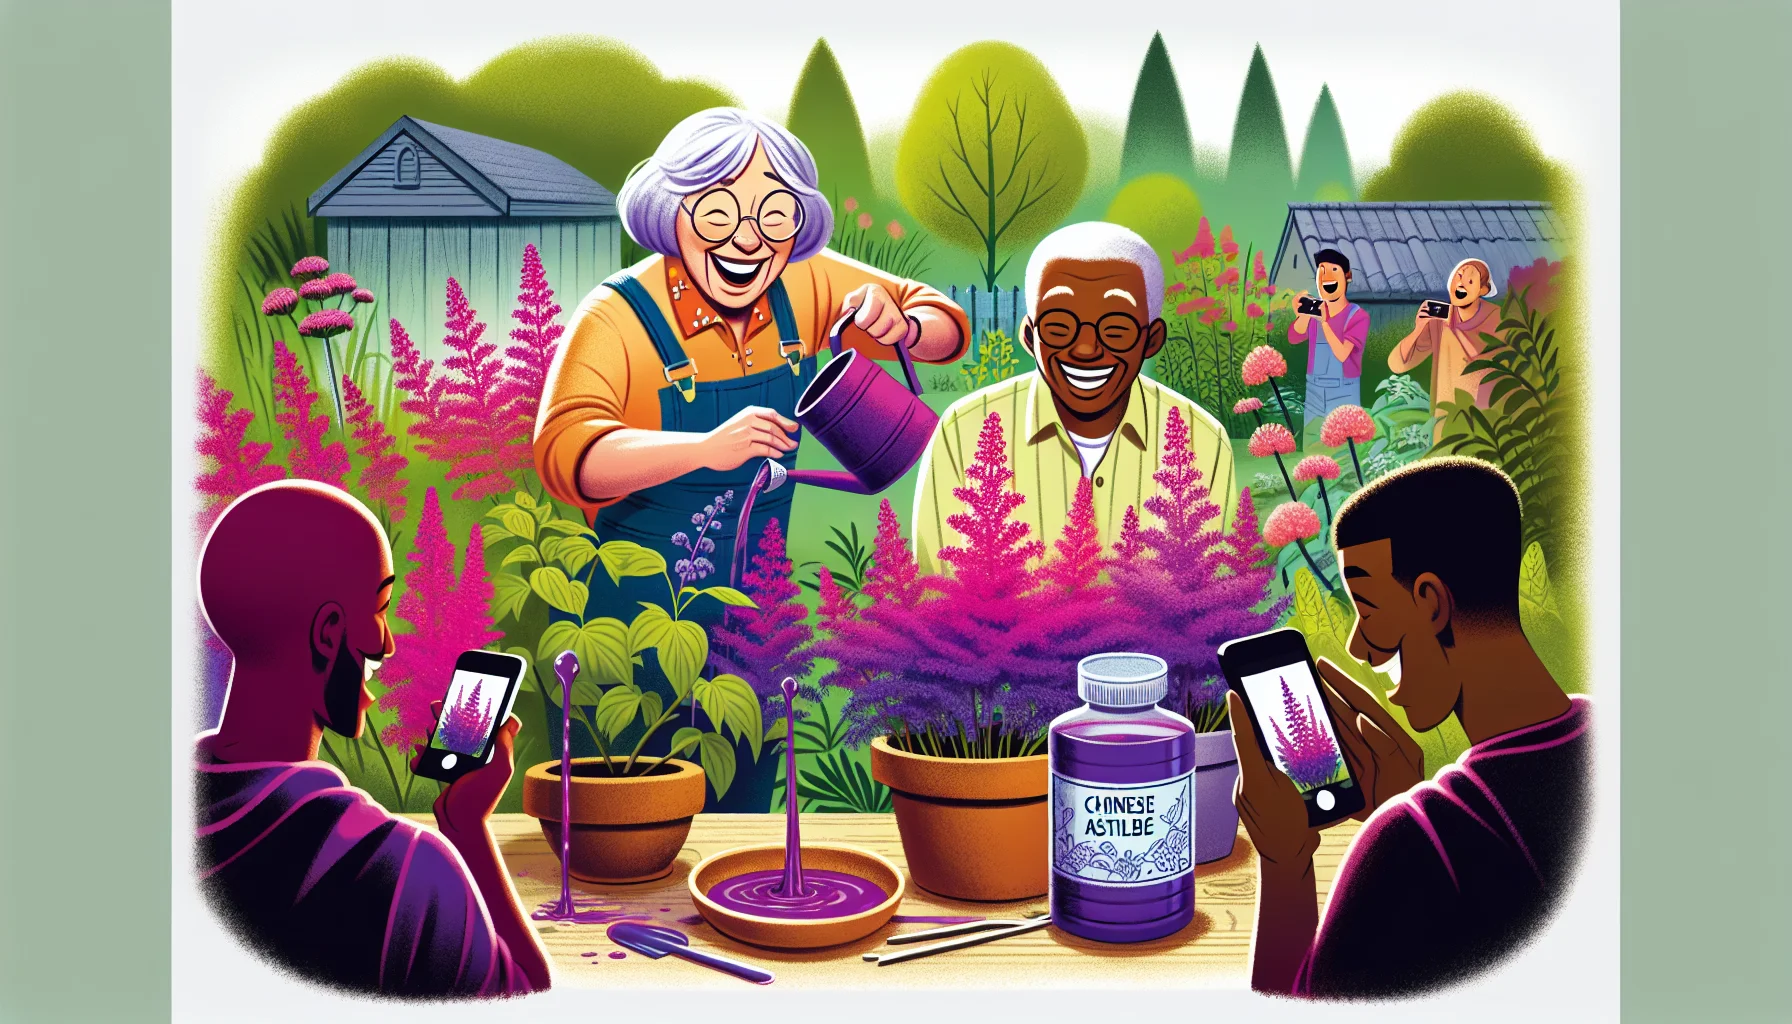 Illustrate a humorous gardening scenario featuring Chinese astilbe plants. Possibly depict a middle-aged woman of Hispanic descent unknowingly pouring what she believes to be water, but is actually a vibrant, harmless, biodegradable purple dye on her beloved plants, eliciting a surprise when they momentarily change color. Add to the scene a young Black teenager capturing this amusing incident on their smartphone, laughing heartily. In the background, let there be a lush greenery of various flowering plants, showcasing the beauty of gardening and encouraging others to partake in this pastime.